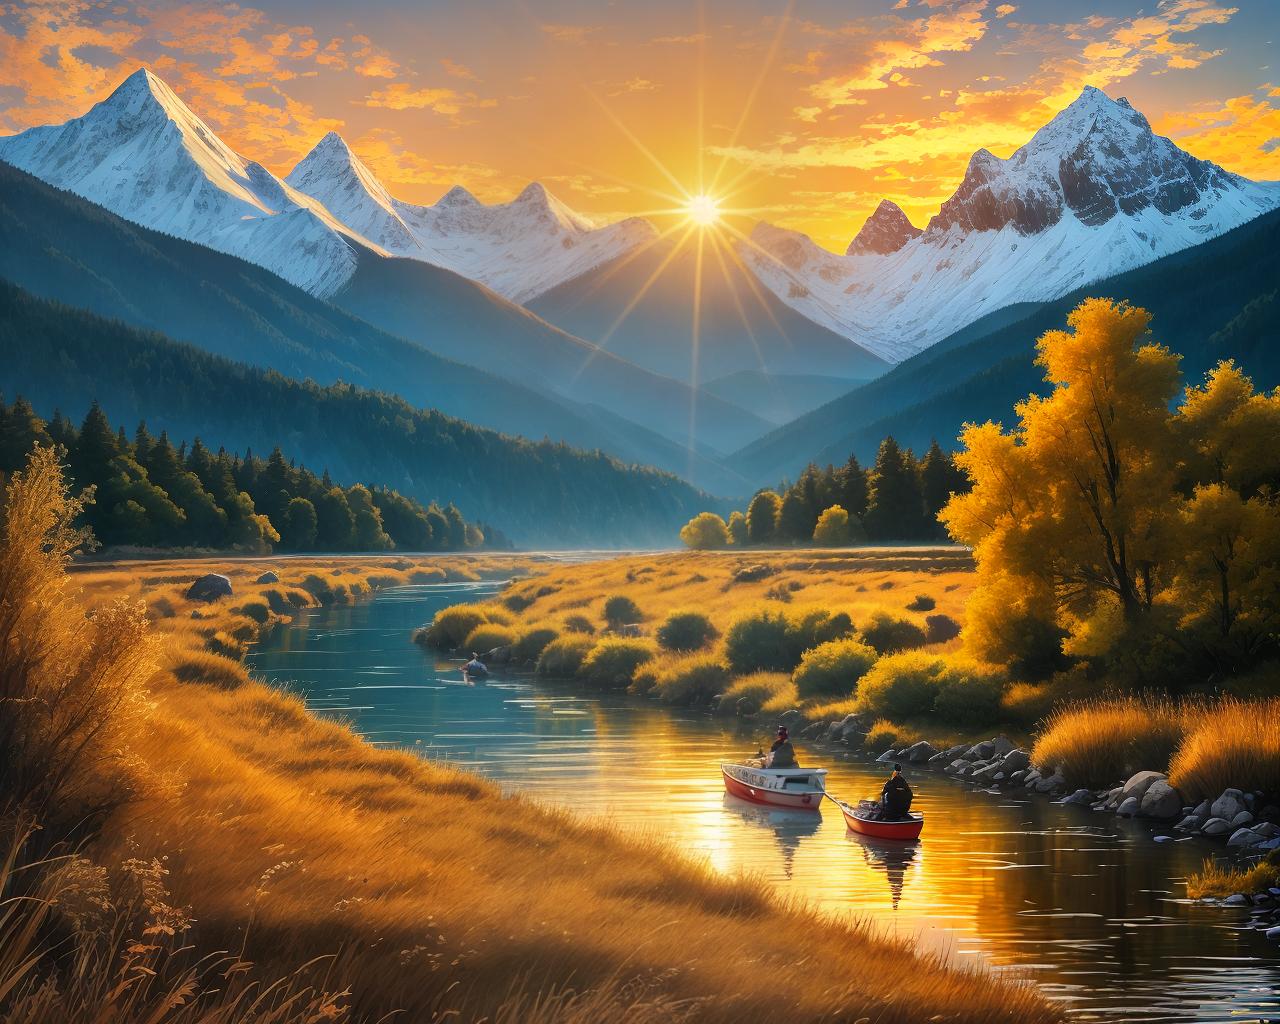  ink punk style of a boat late at midnight sailing along a river with mountains in the background, the sun has just risen, gold/yellowish colors peaceful, detailed, painting, clouds in the sky, snowy mountains, fish jumping out of the river, reeds by the bank of the river,